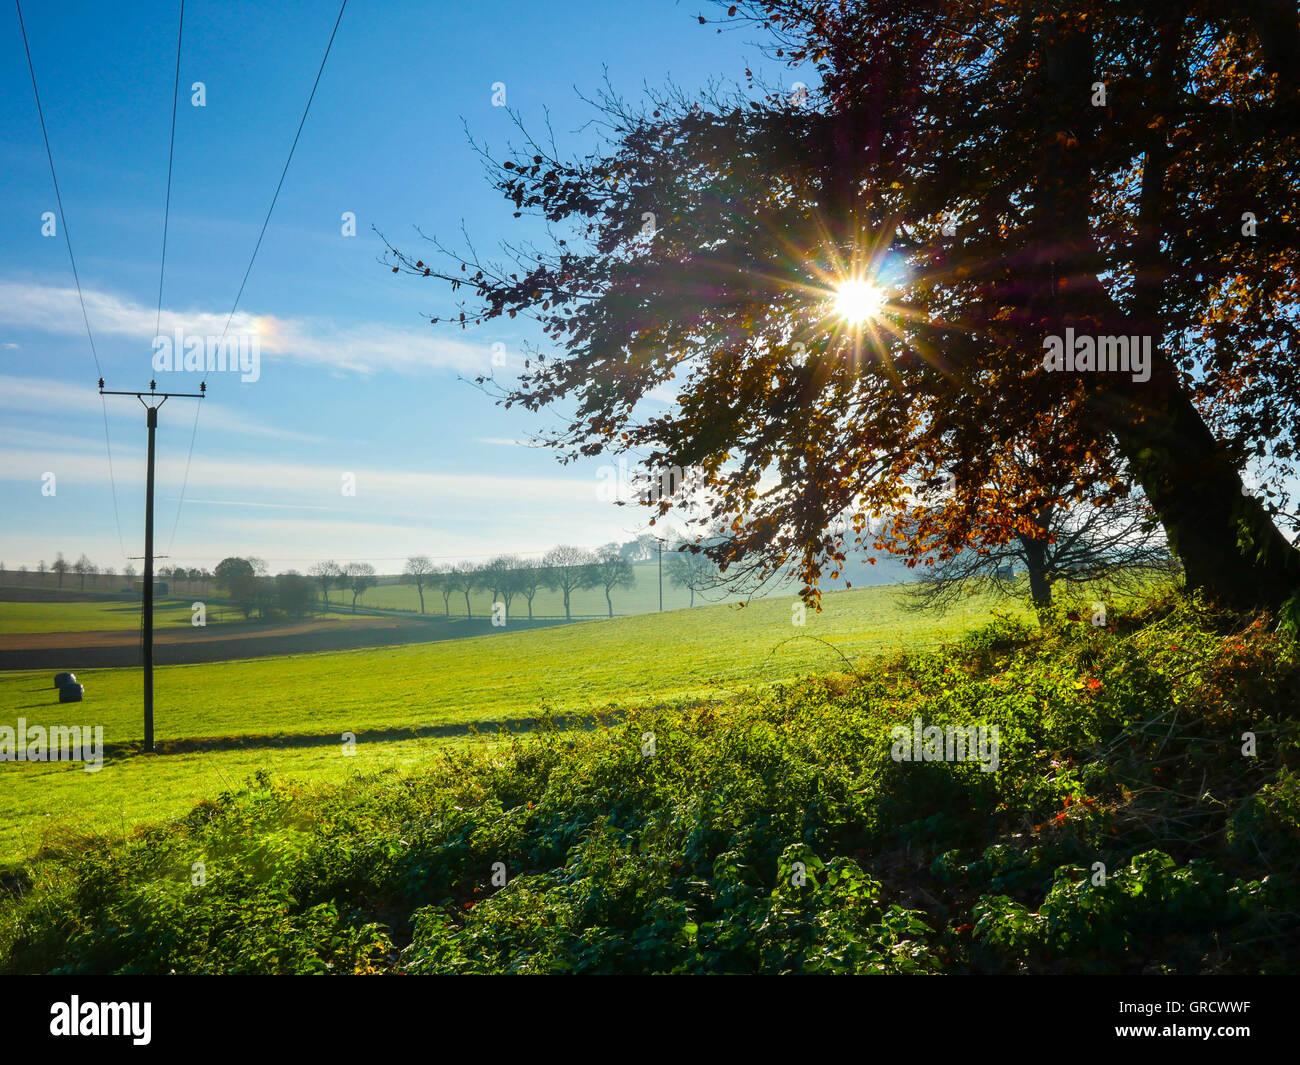 Autumn Landscape And Tree In The Sunshine Stock Photo